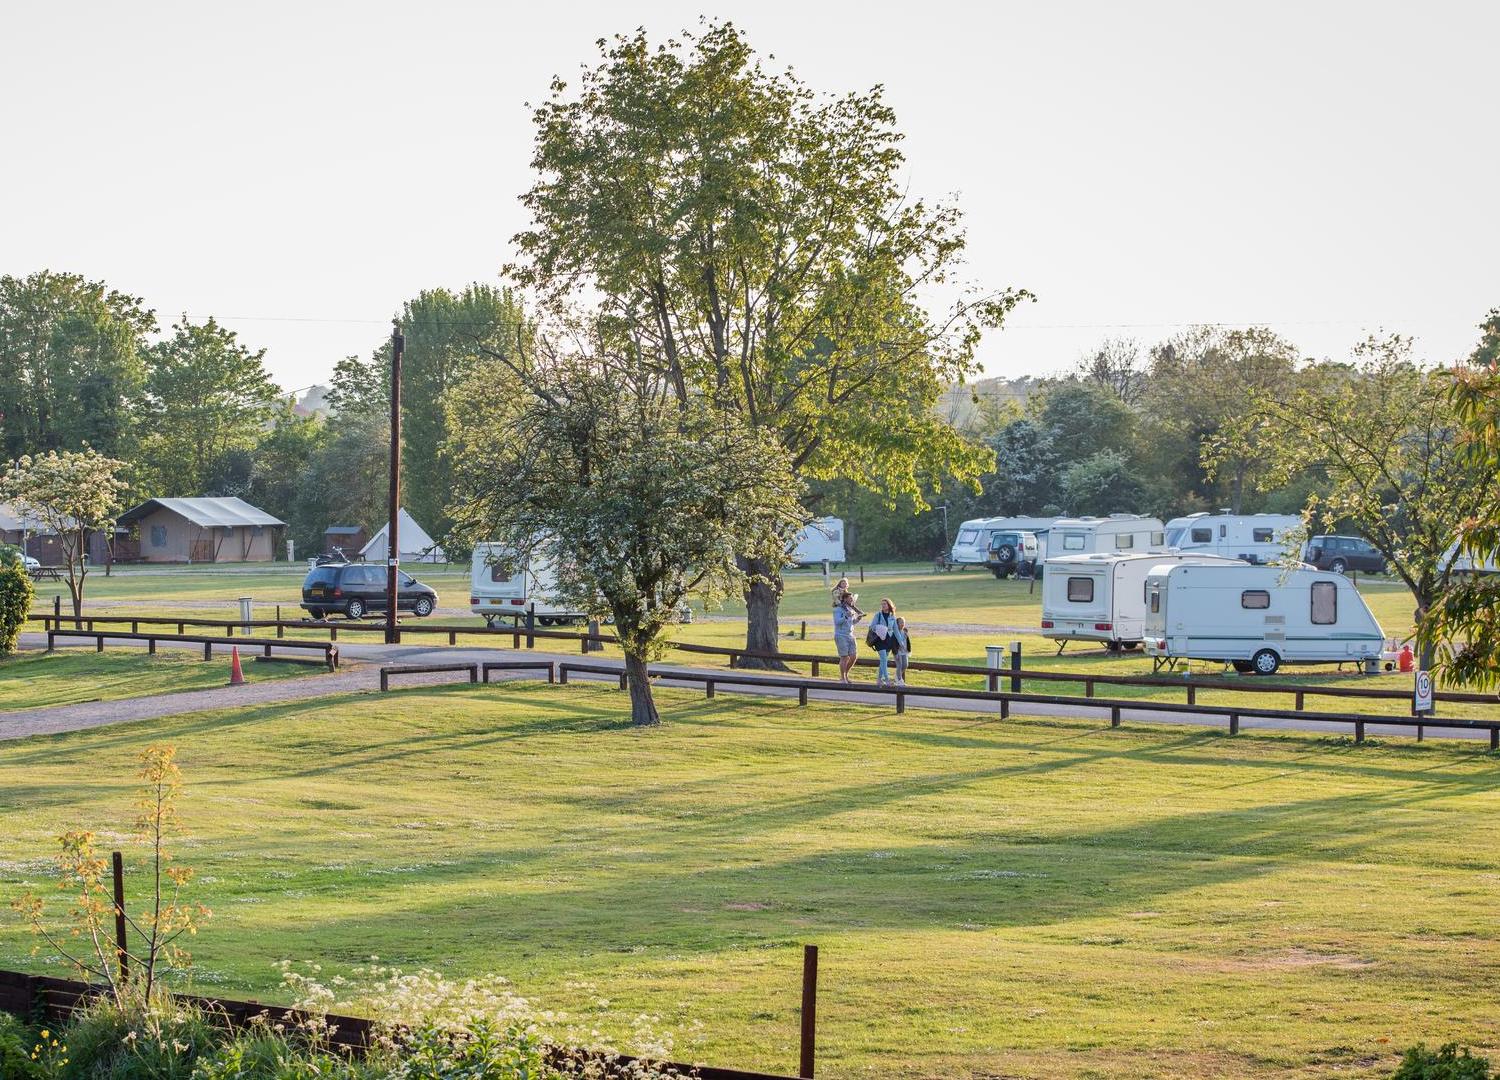 Camping field showing green space and trees